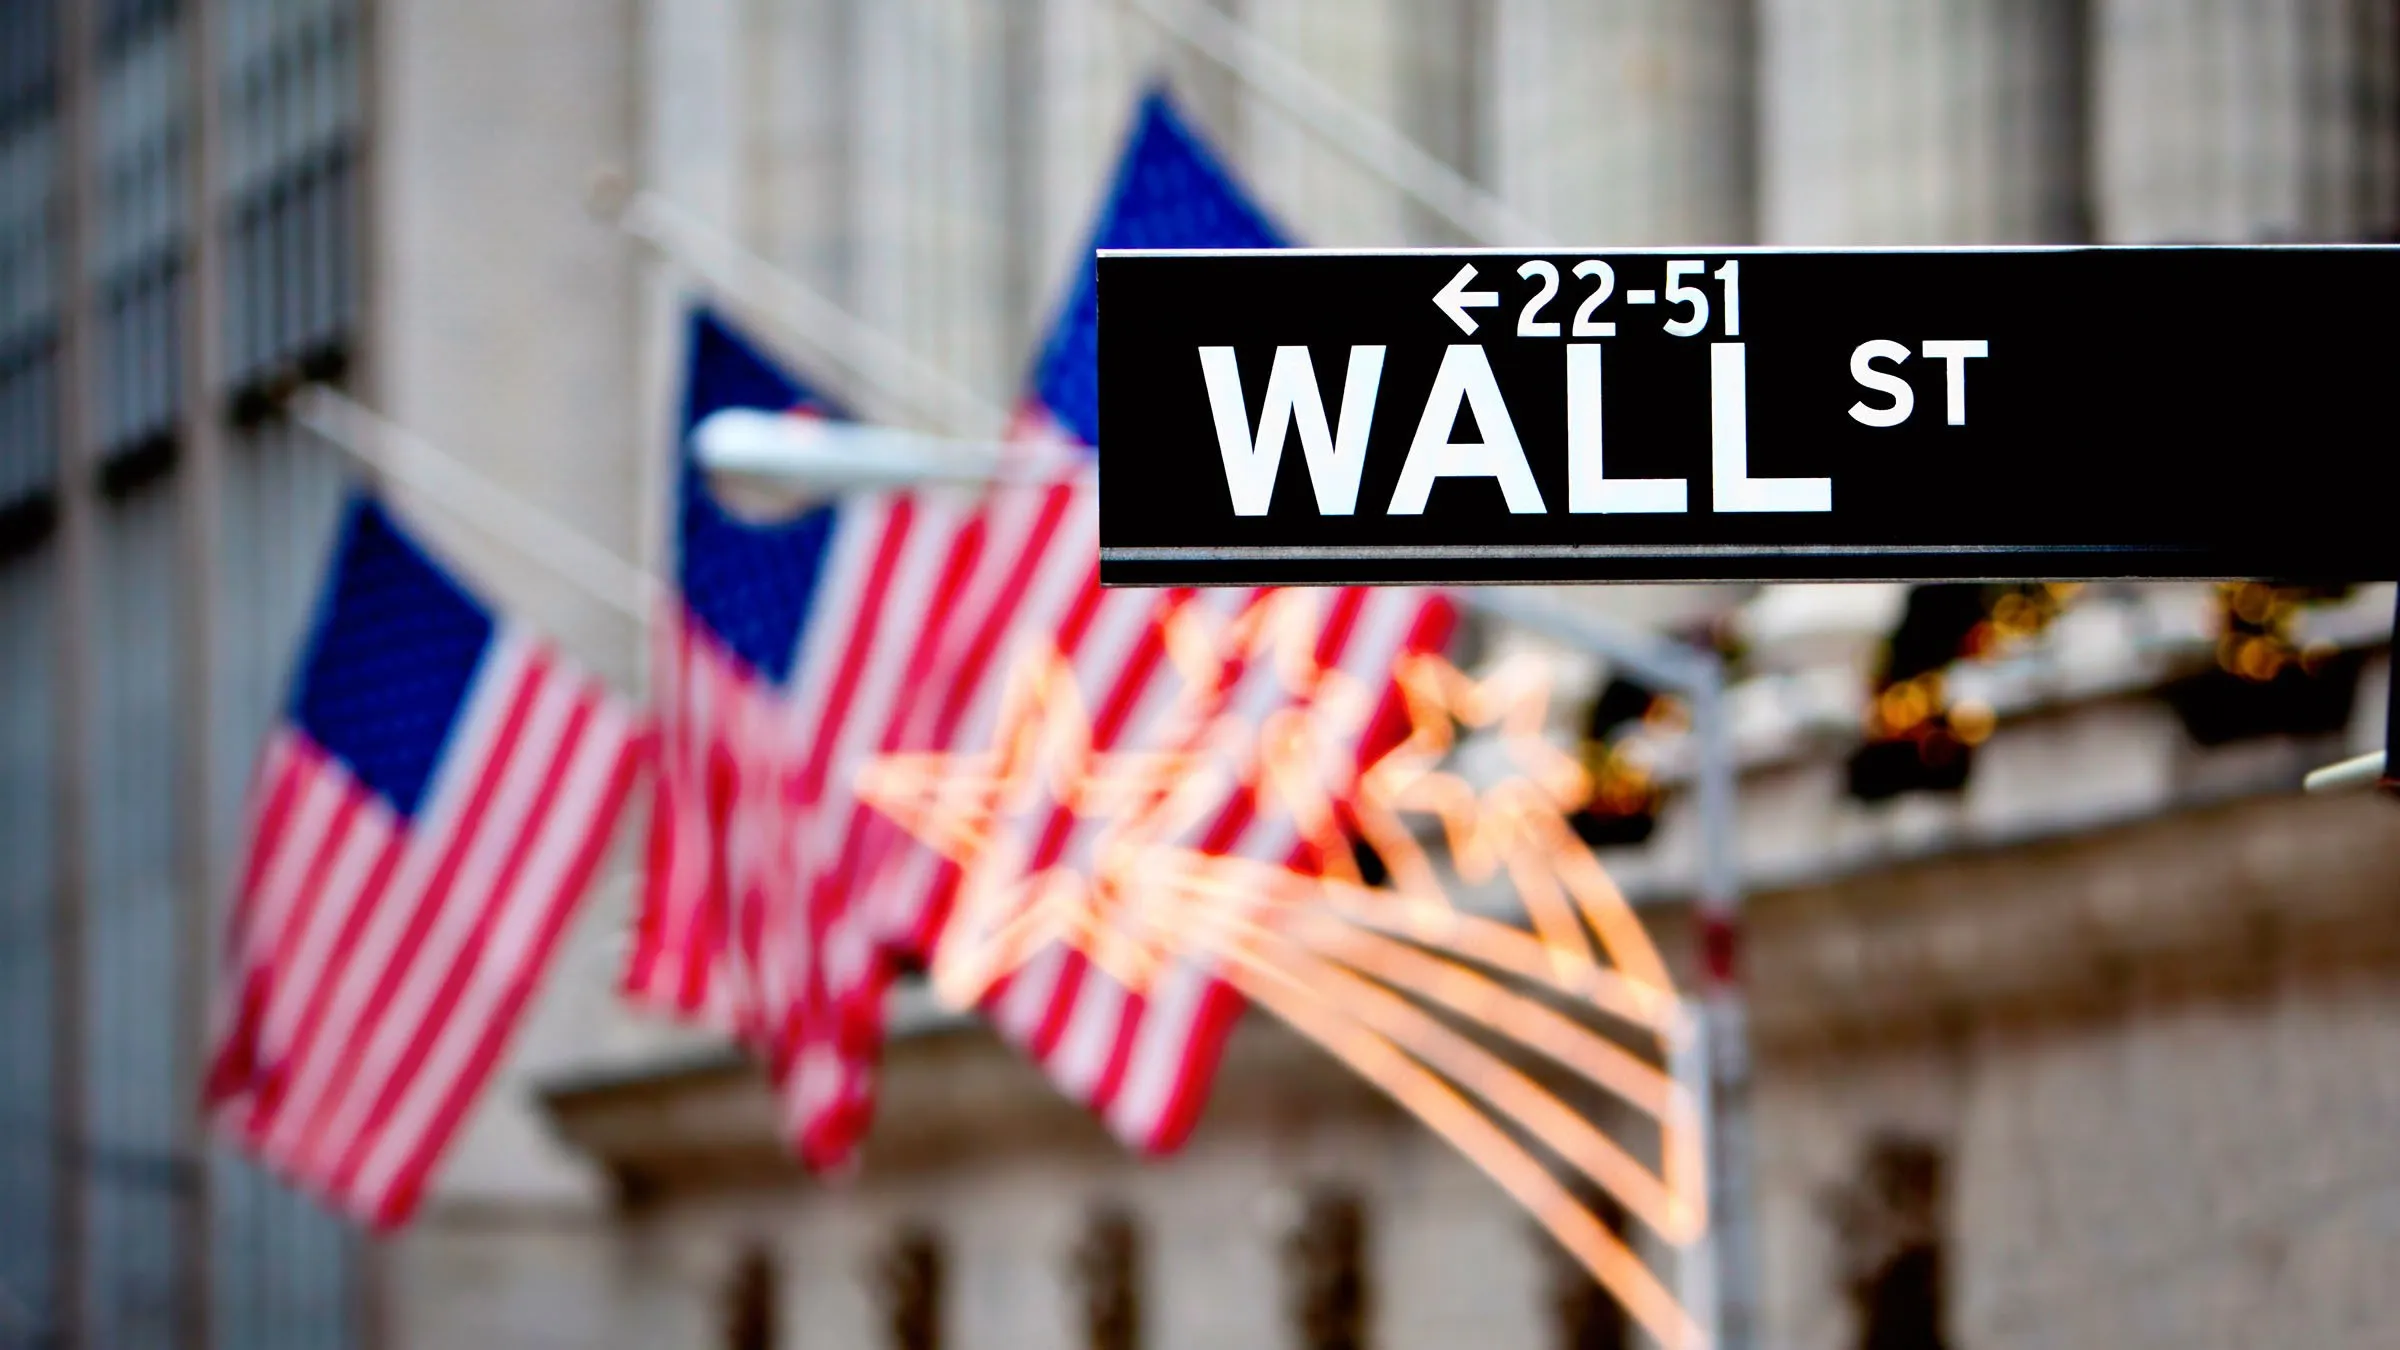 Wall street sign in New York with the New York Stock Exchange background. Image: Stuart Monk/Shutterstock